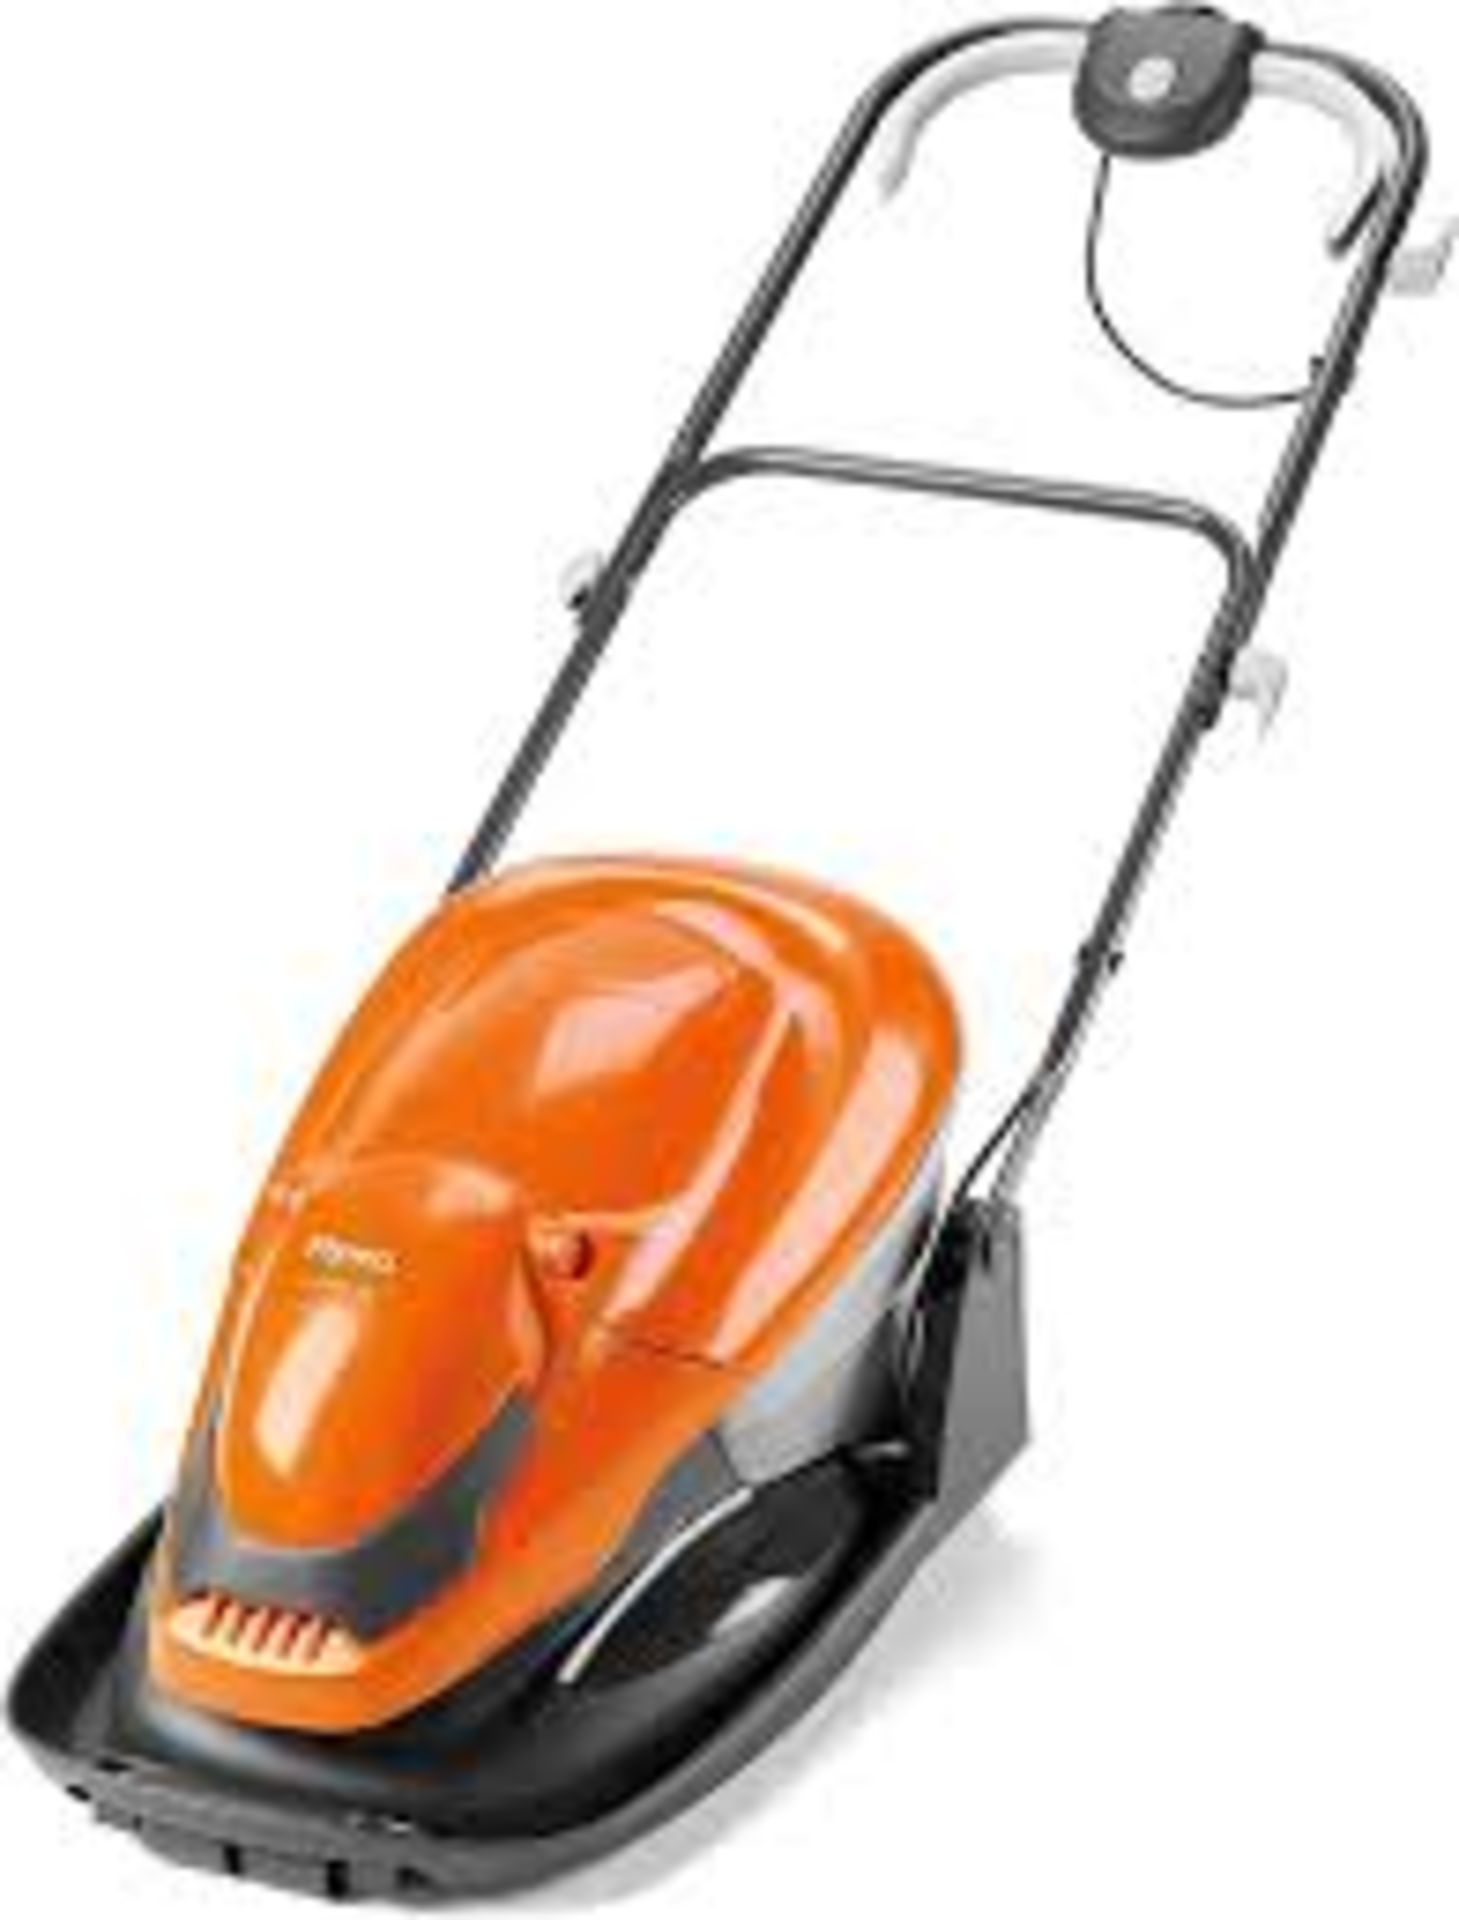 Flymo EasiGlide 300 Hover Collect Lawn Mower - 1700W Motor. - BW.